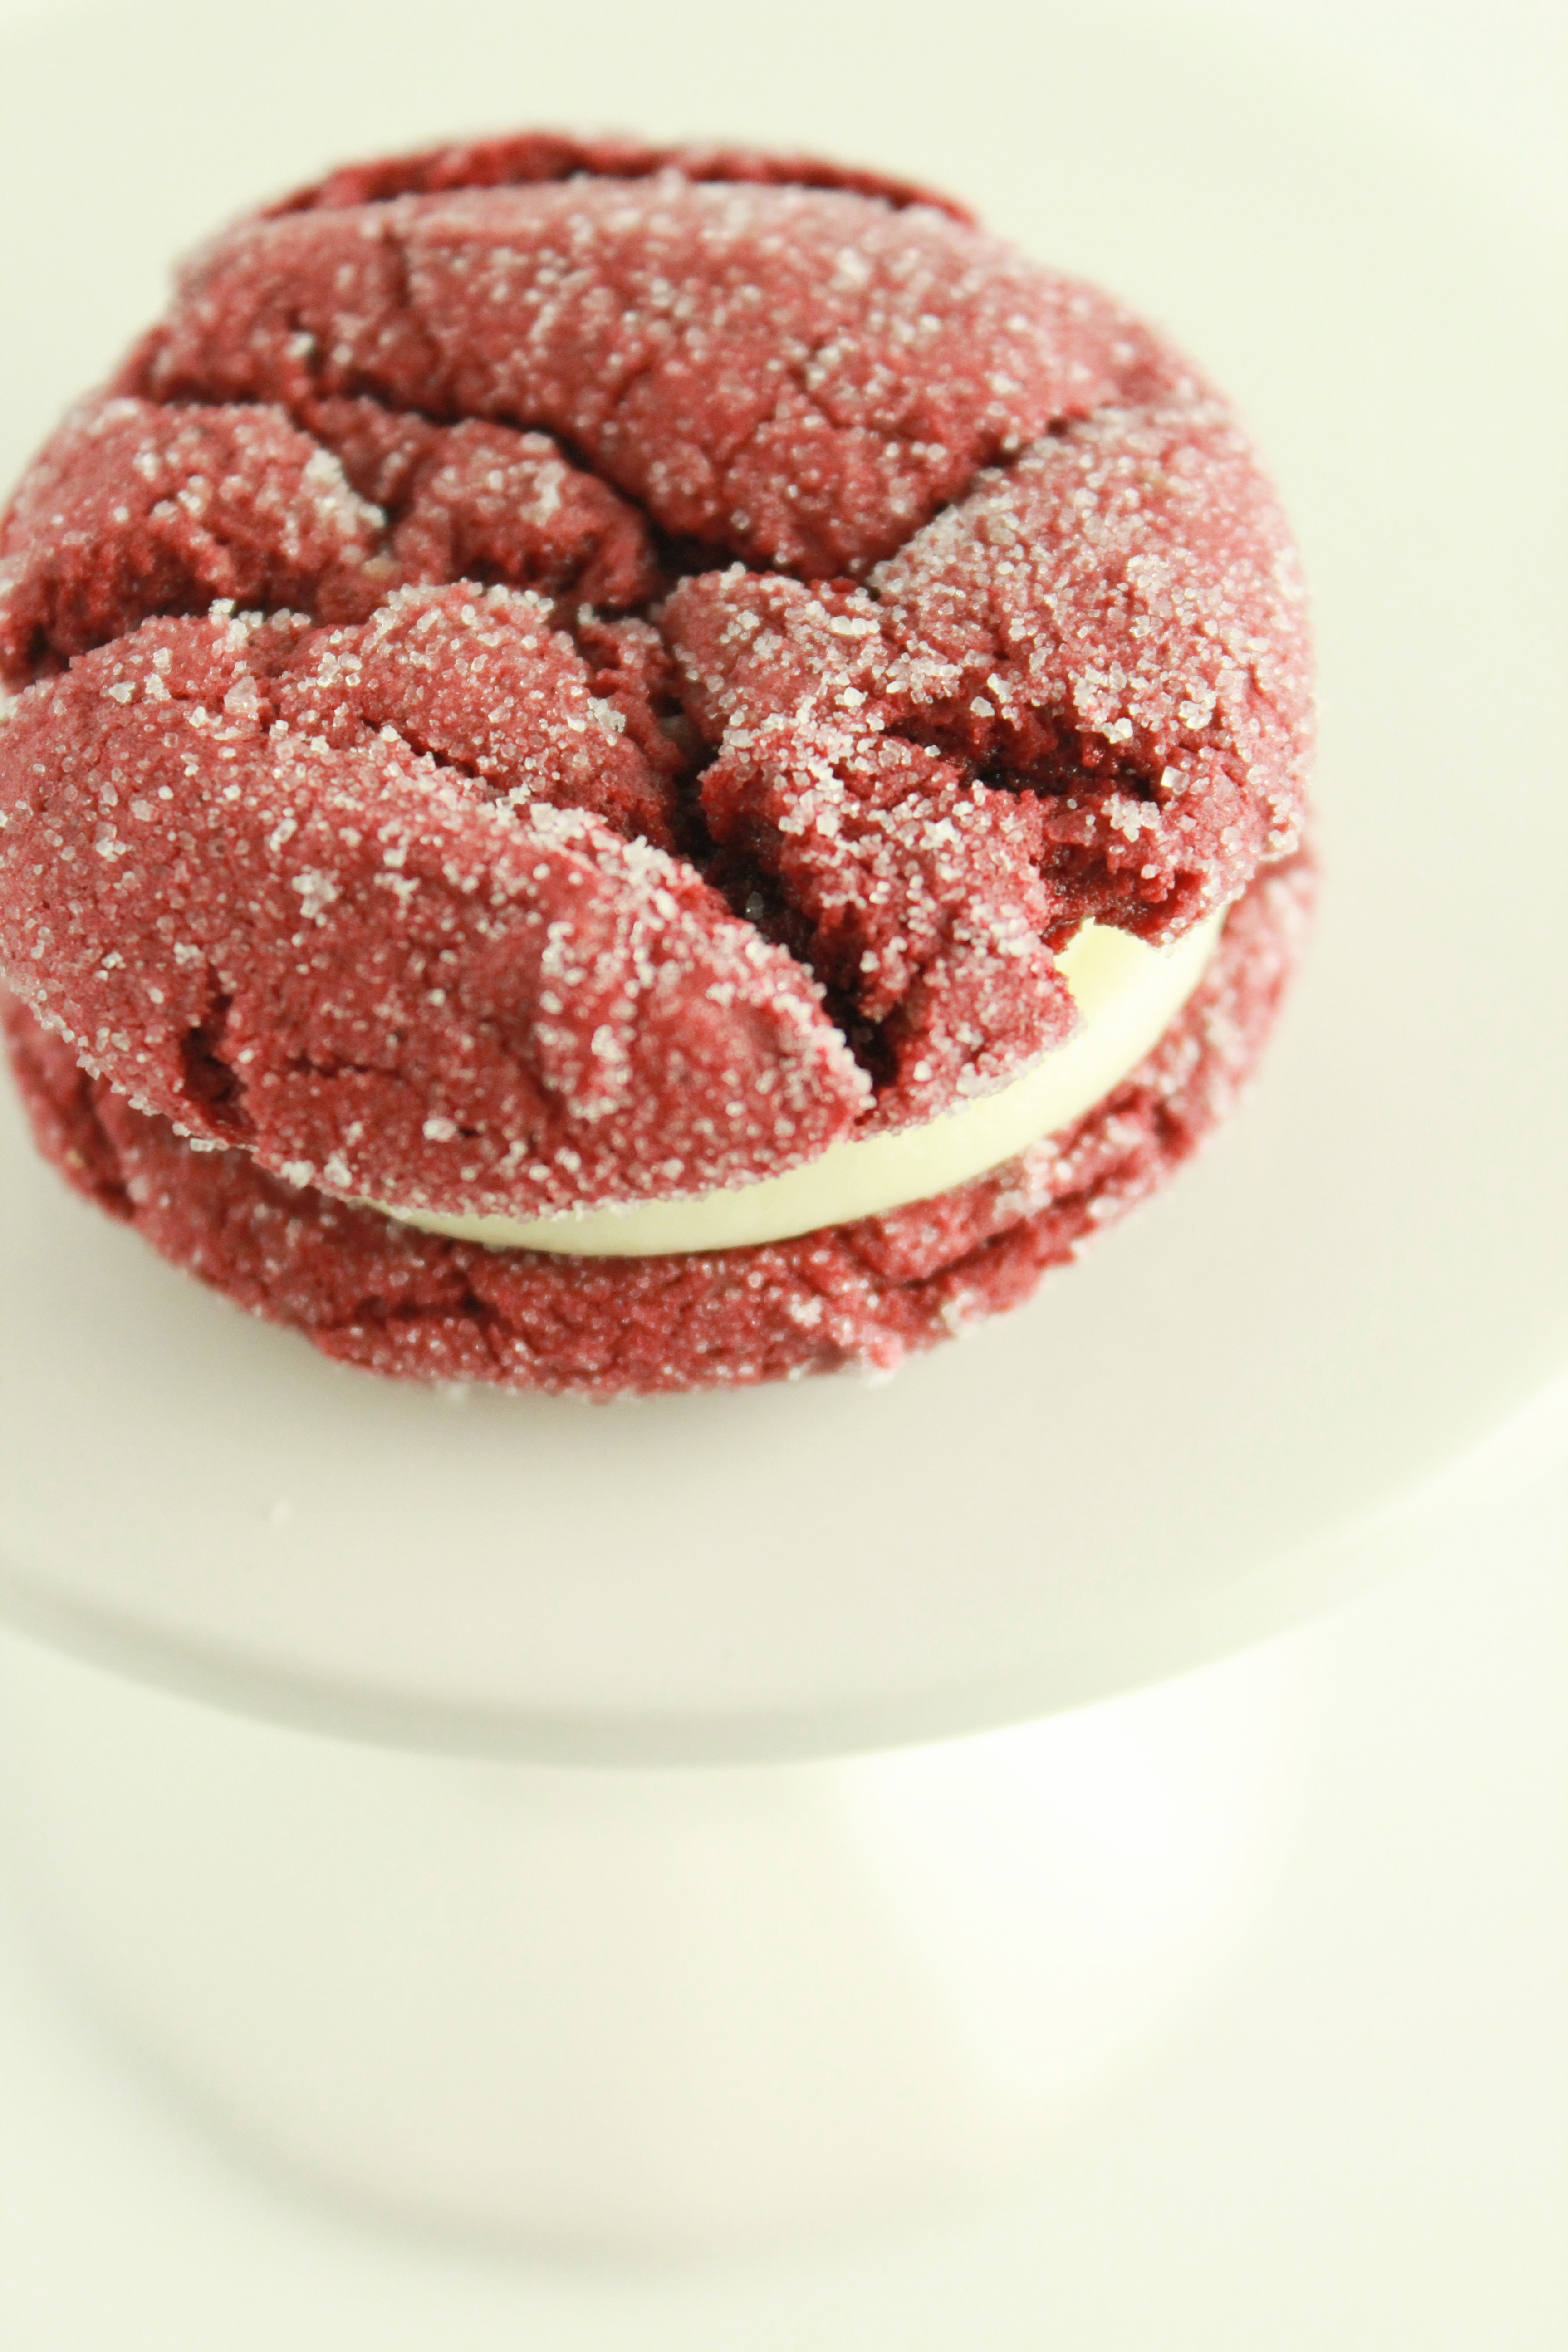 red velvet sandwich cookies recipe featured by top US food blog, Practically Homemade